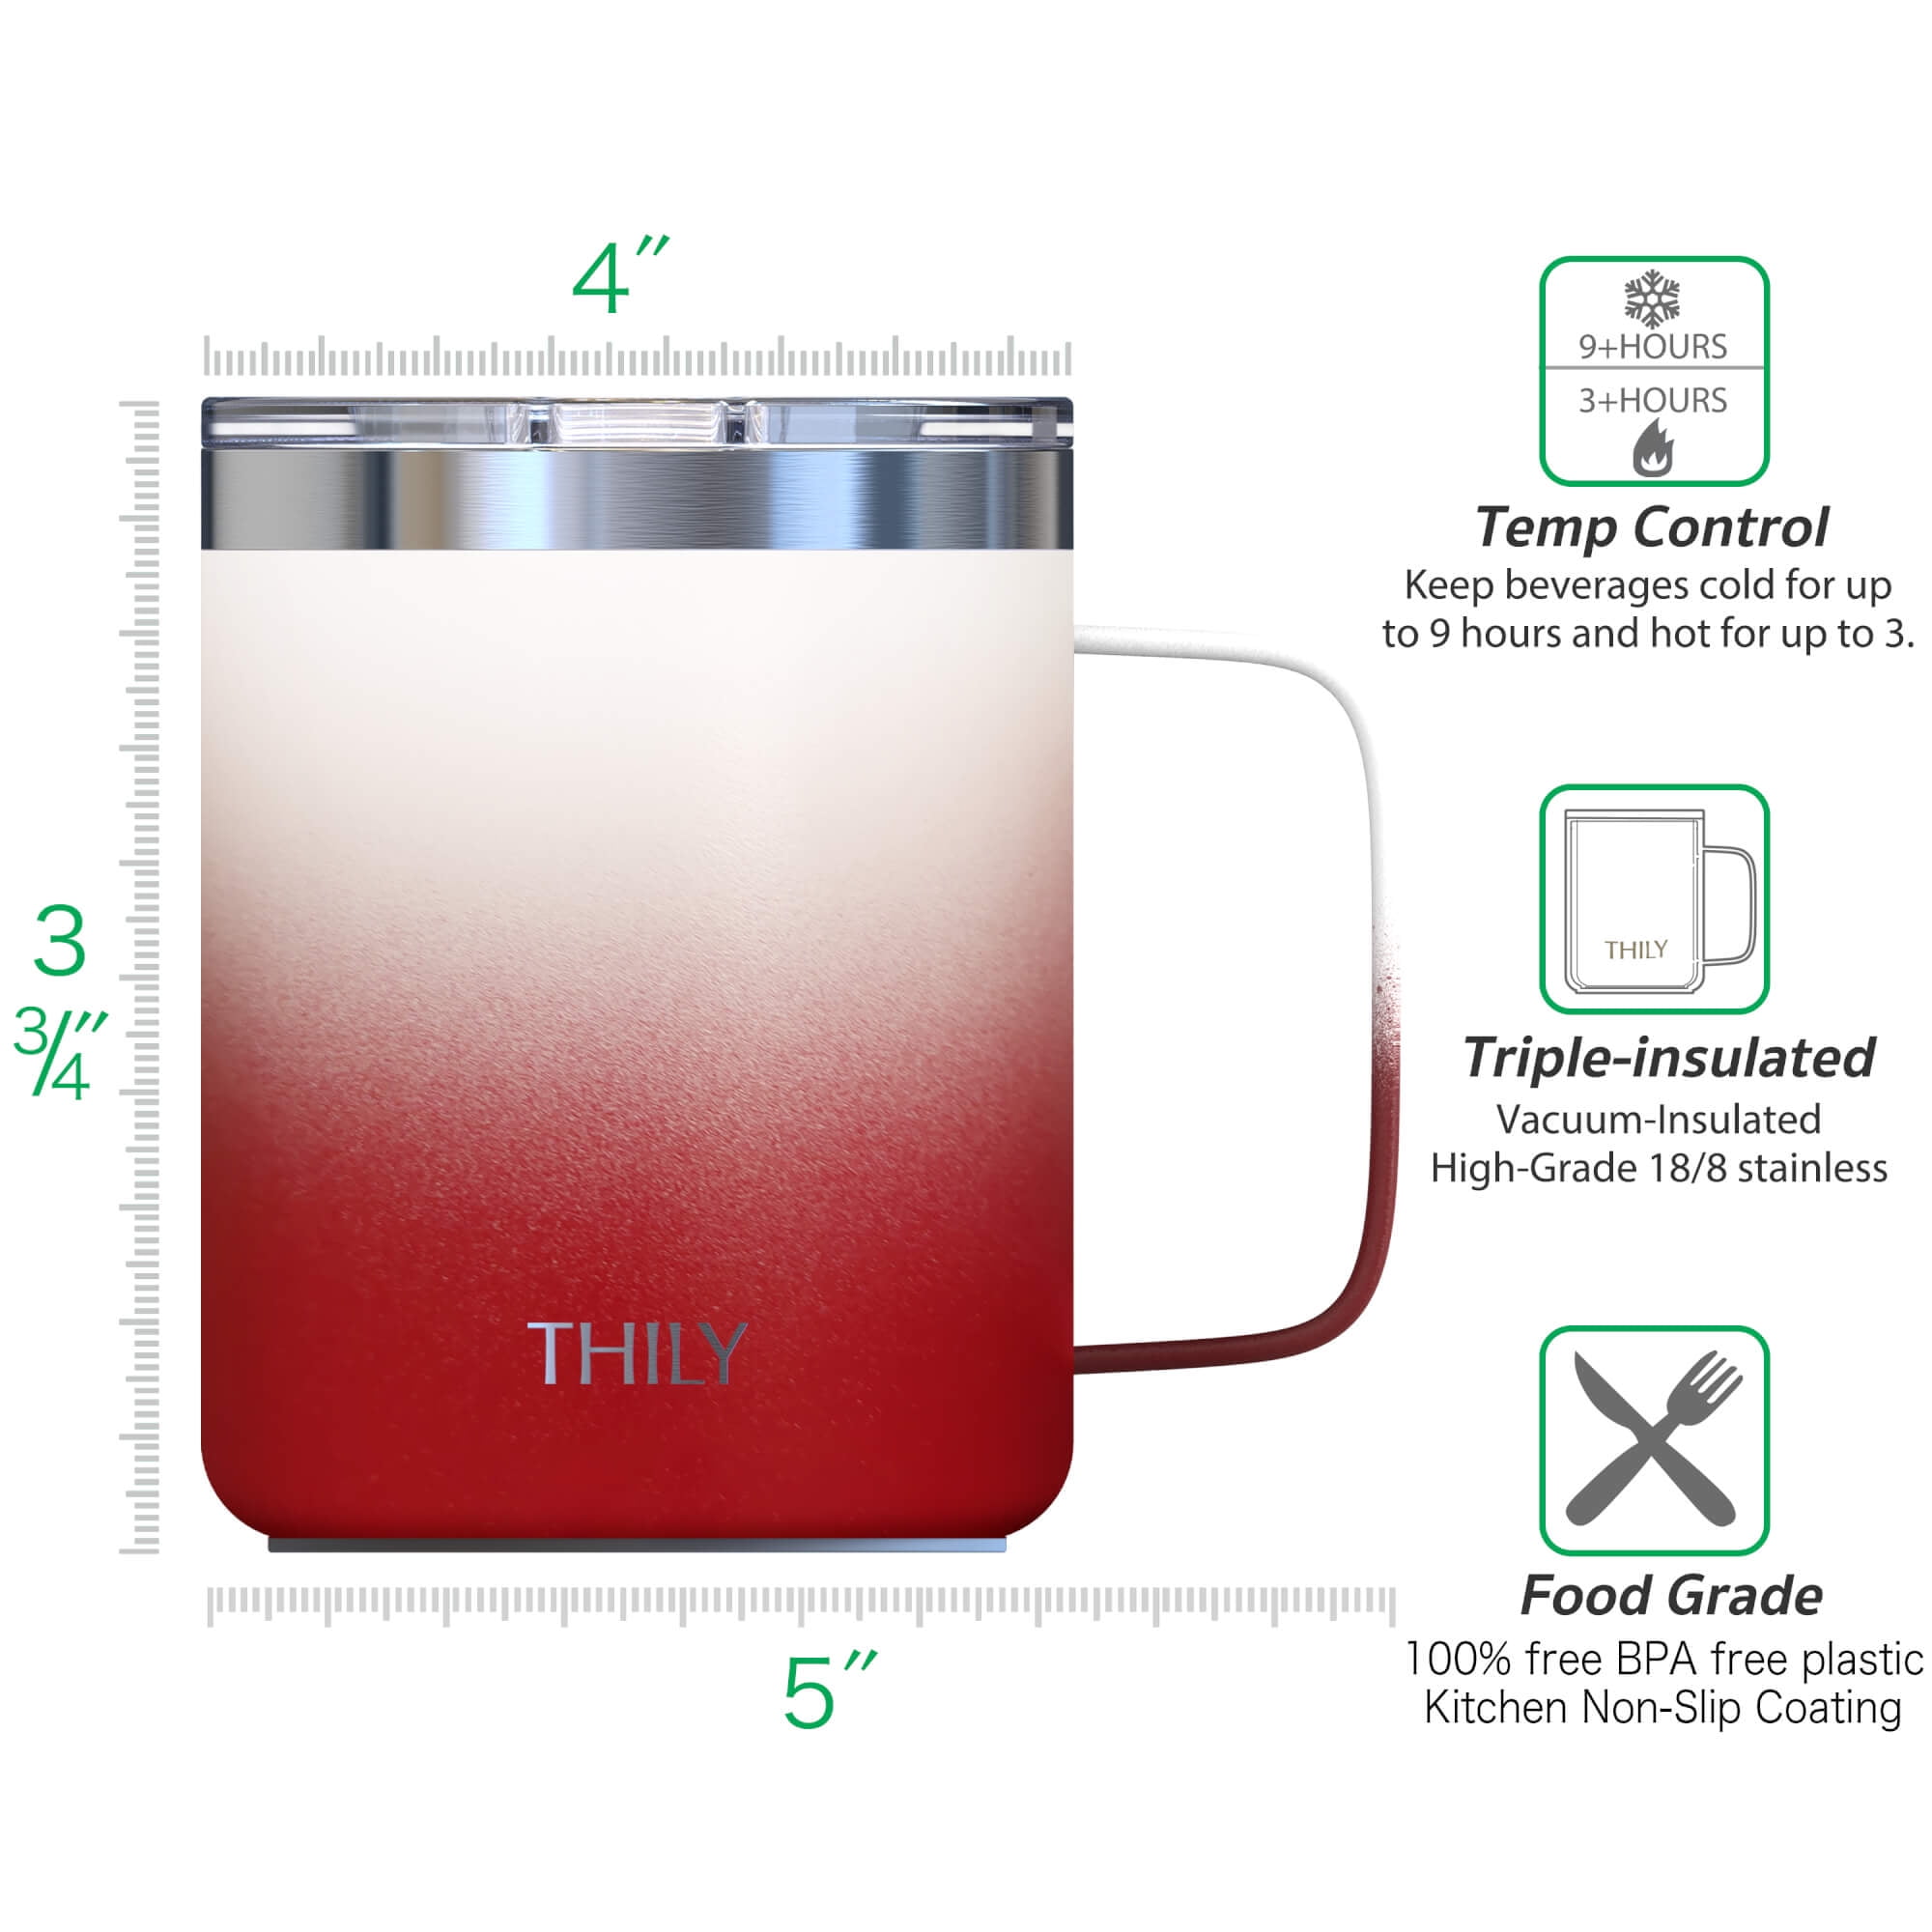 Here are the 4 reasons why i love my BrüMate Toddy XL Insulated Coffee